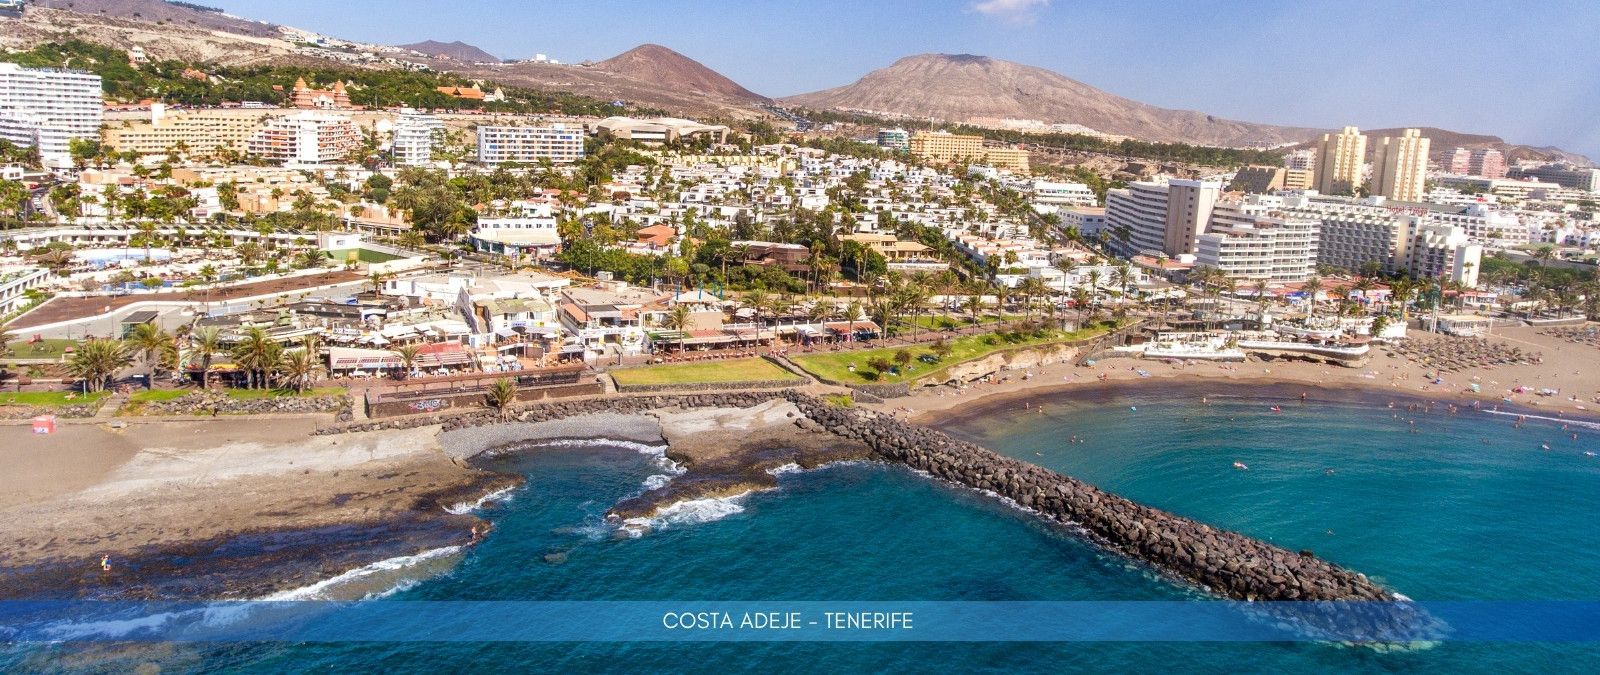 Costa Adeje: Where Luxury Meets Natural Beauty